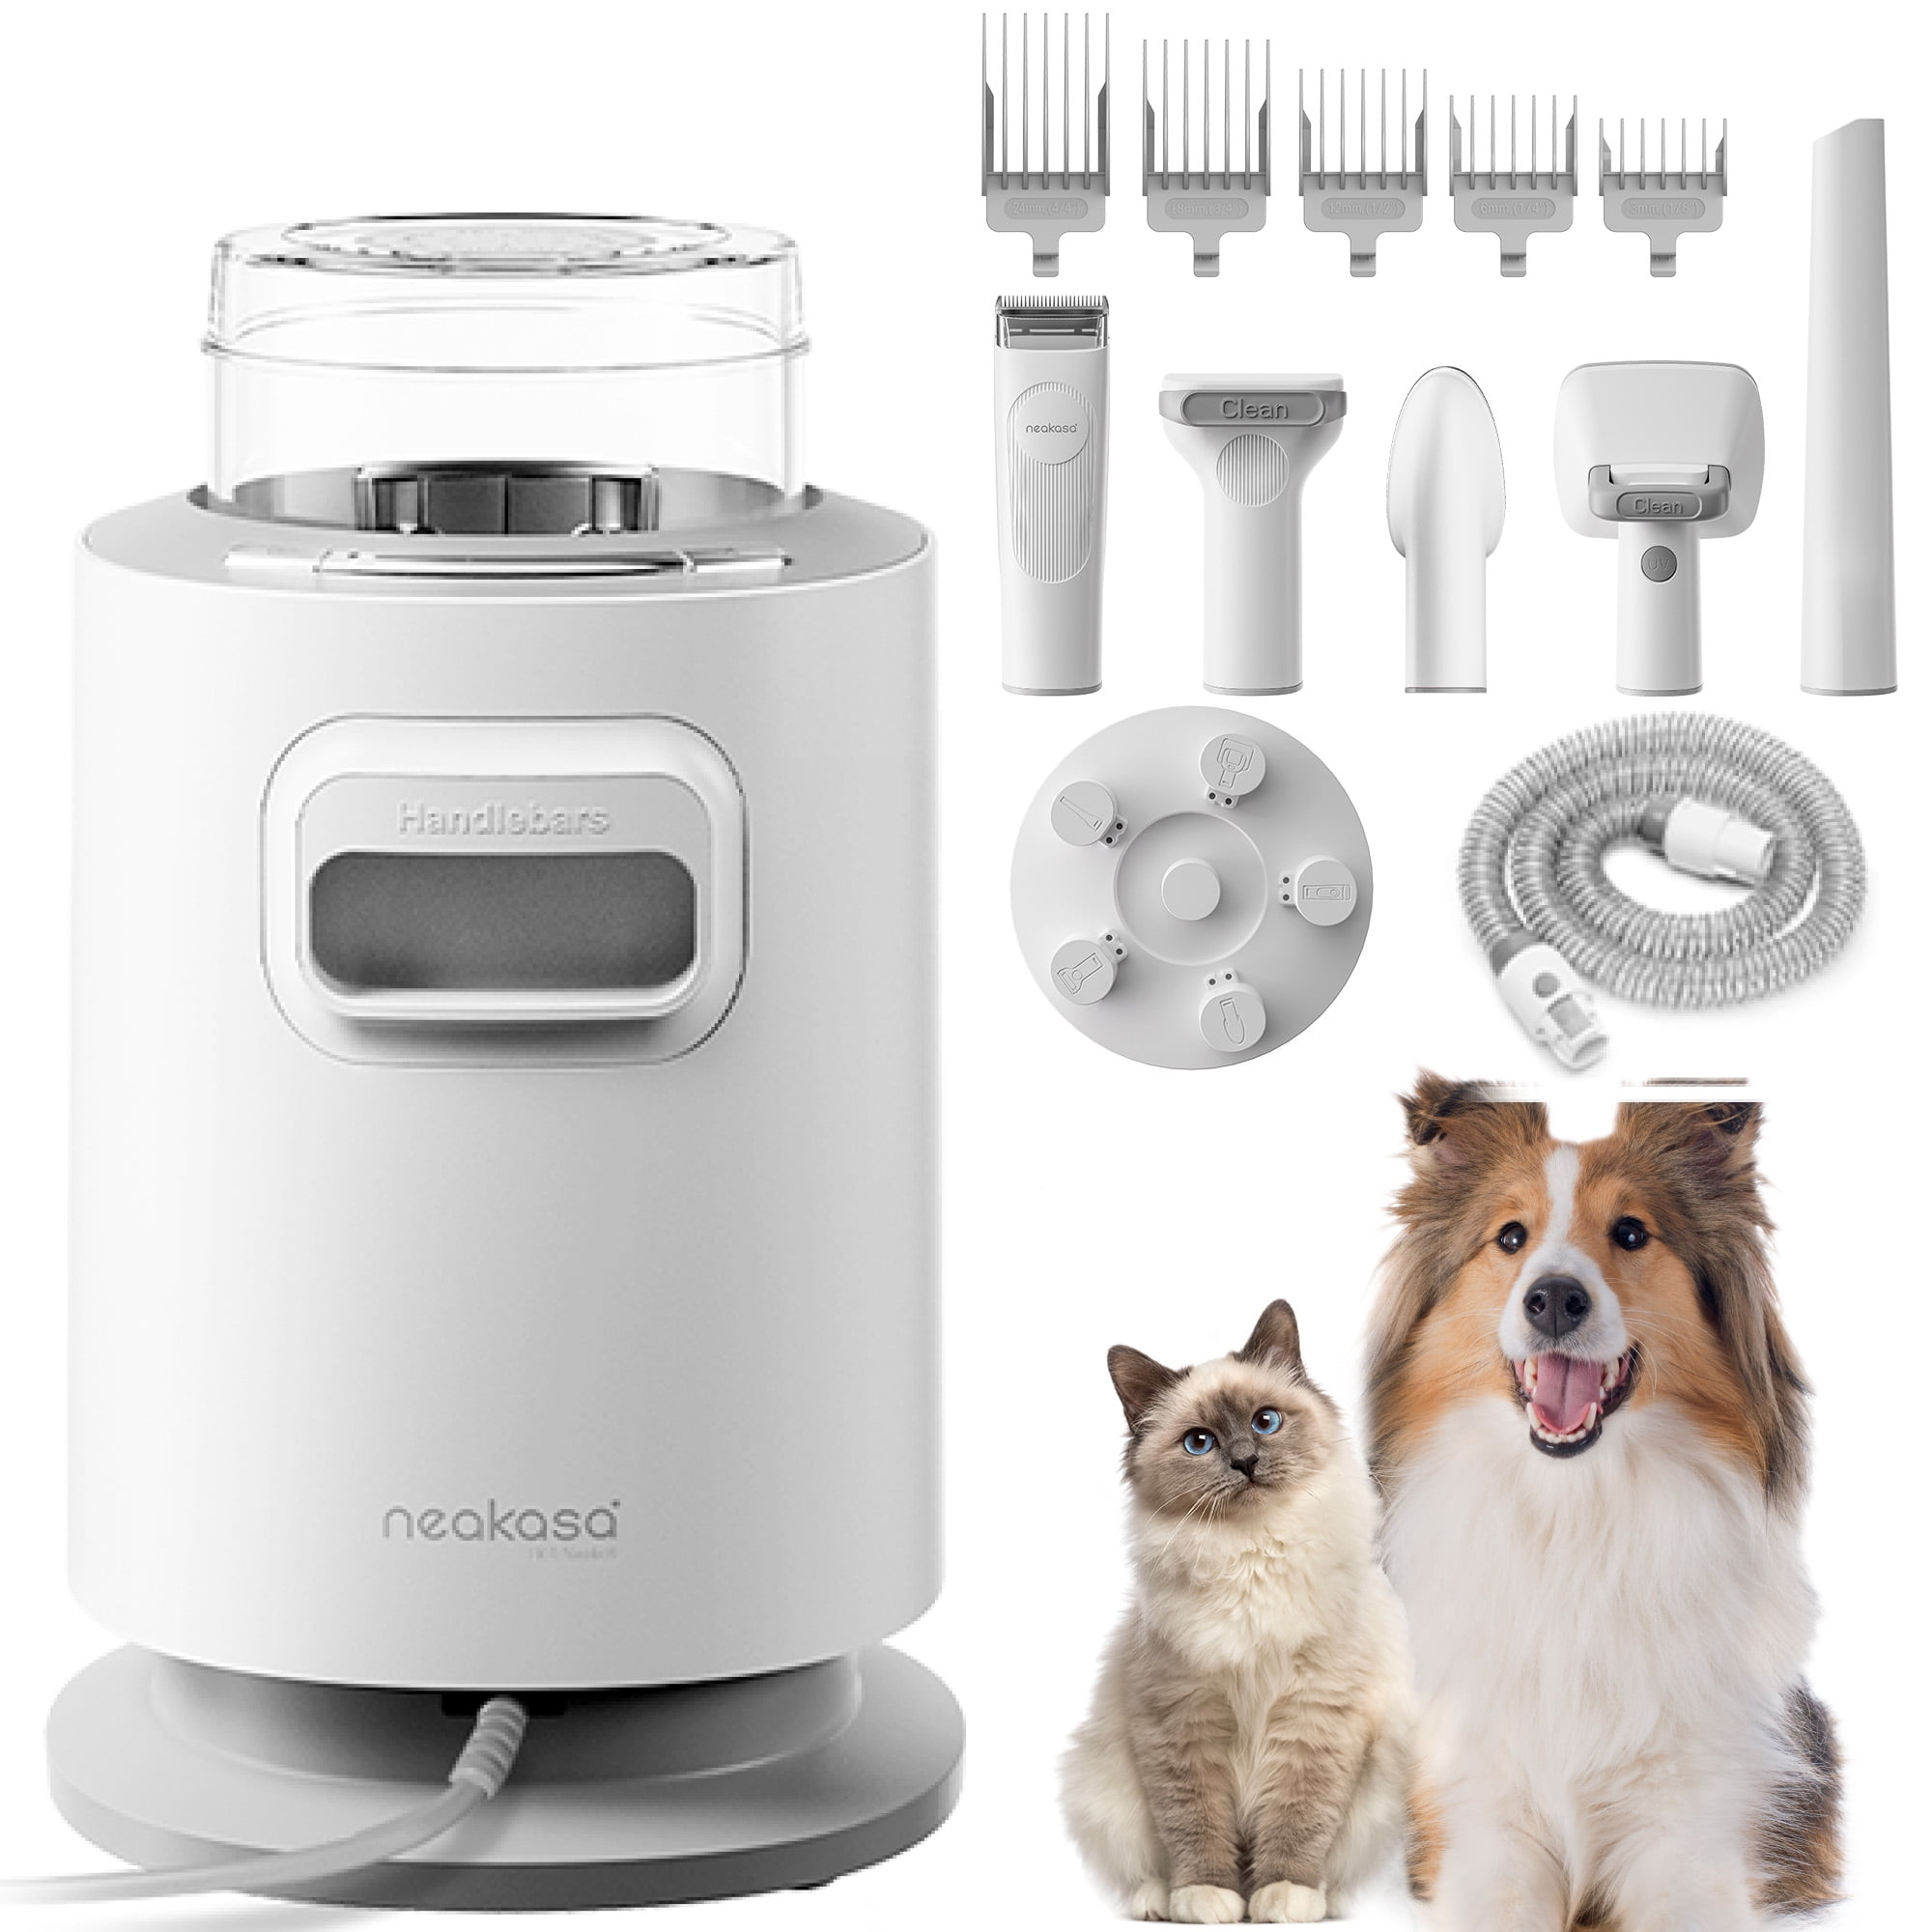 Neakasa P0 Pro Dog Grooming Kit,Low Noise Pet Grooming Vacuum Suction 99.7% Pet Hair,5 Professional Pet Grooming Tools for Dogs/Cats/Other Animals